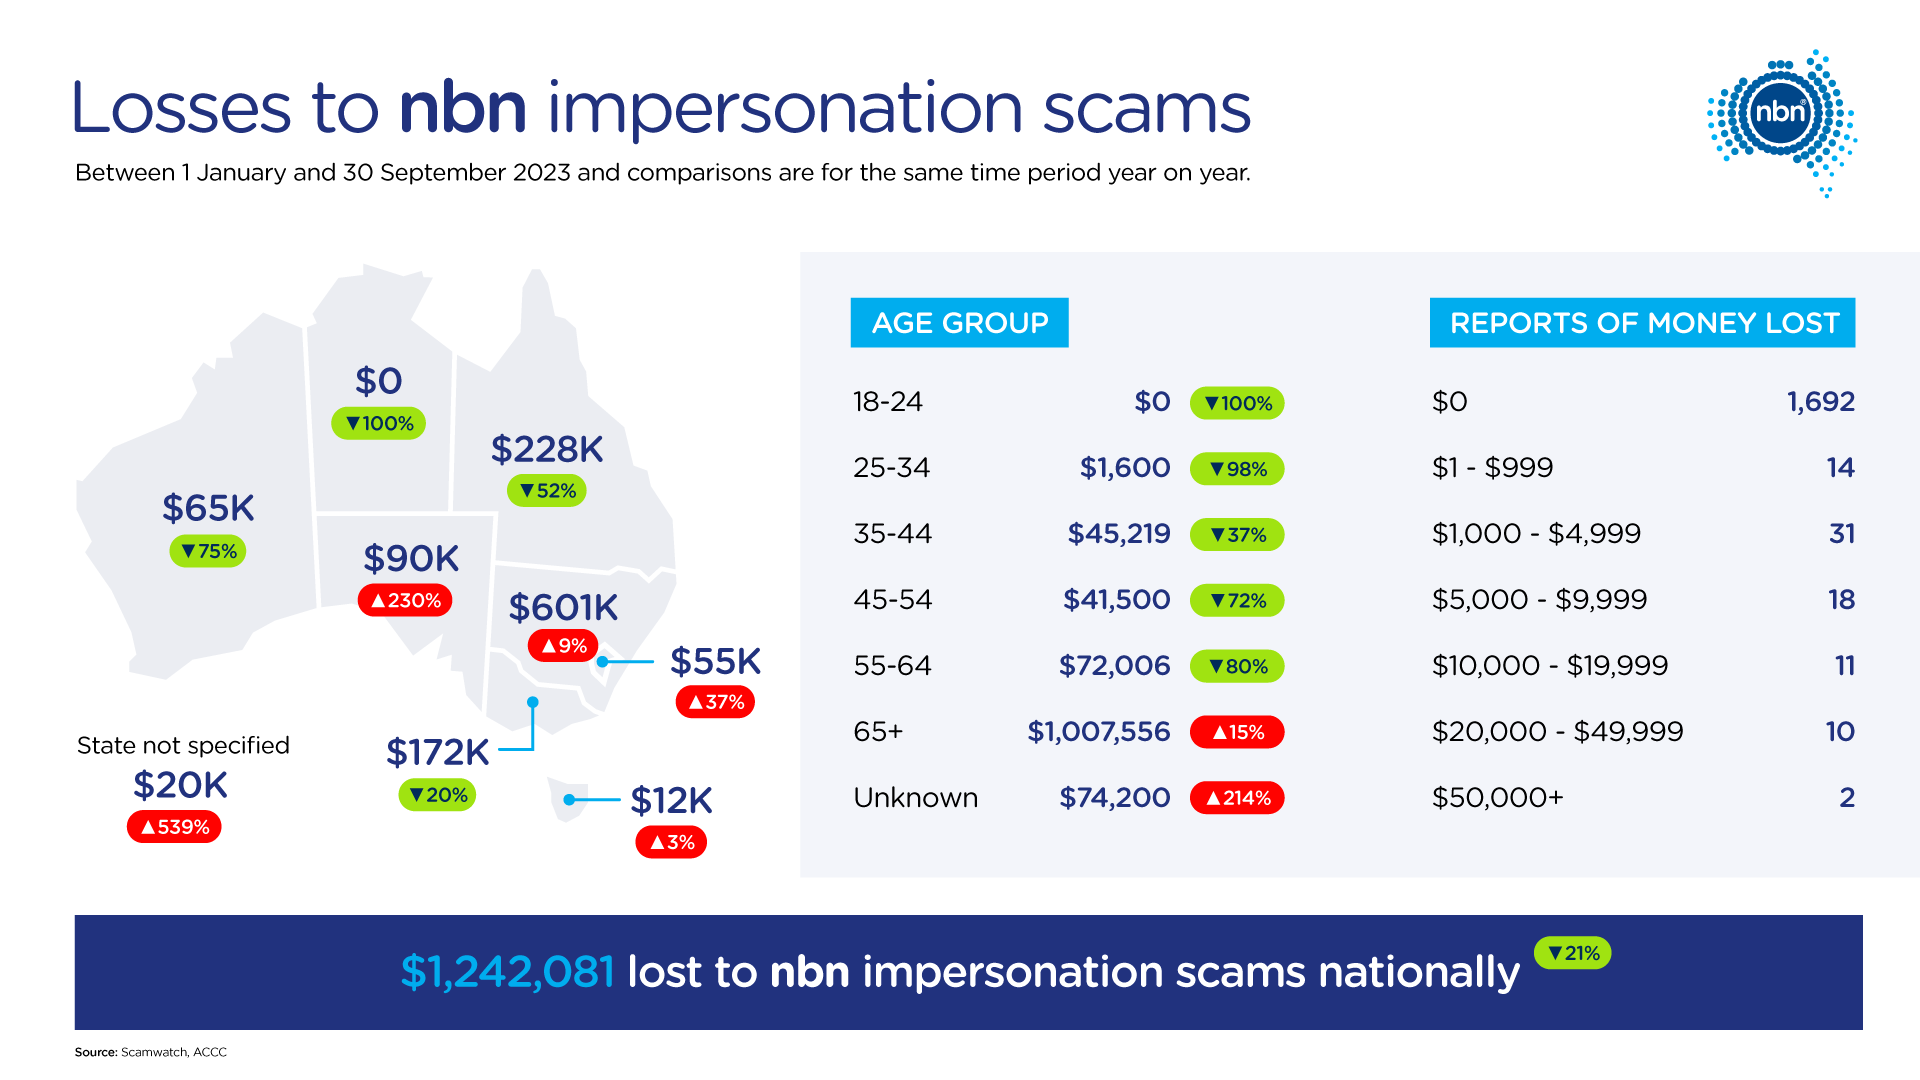 Losses to nbn impersonation scams